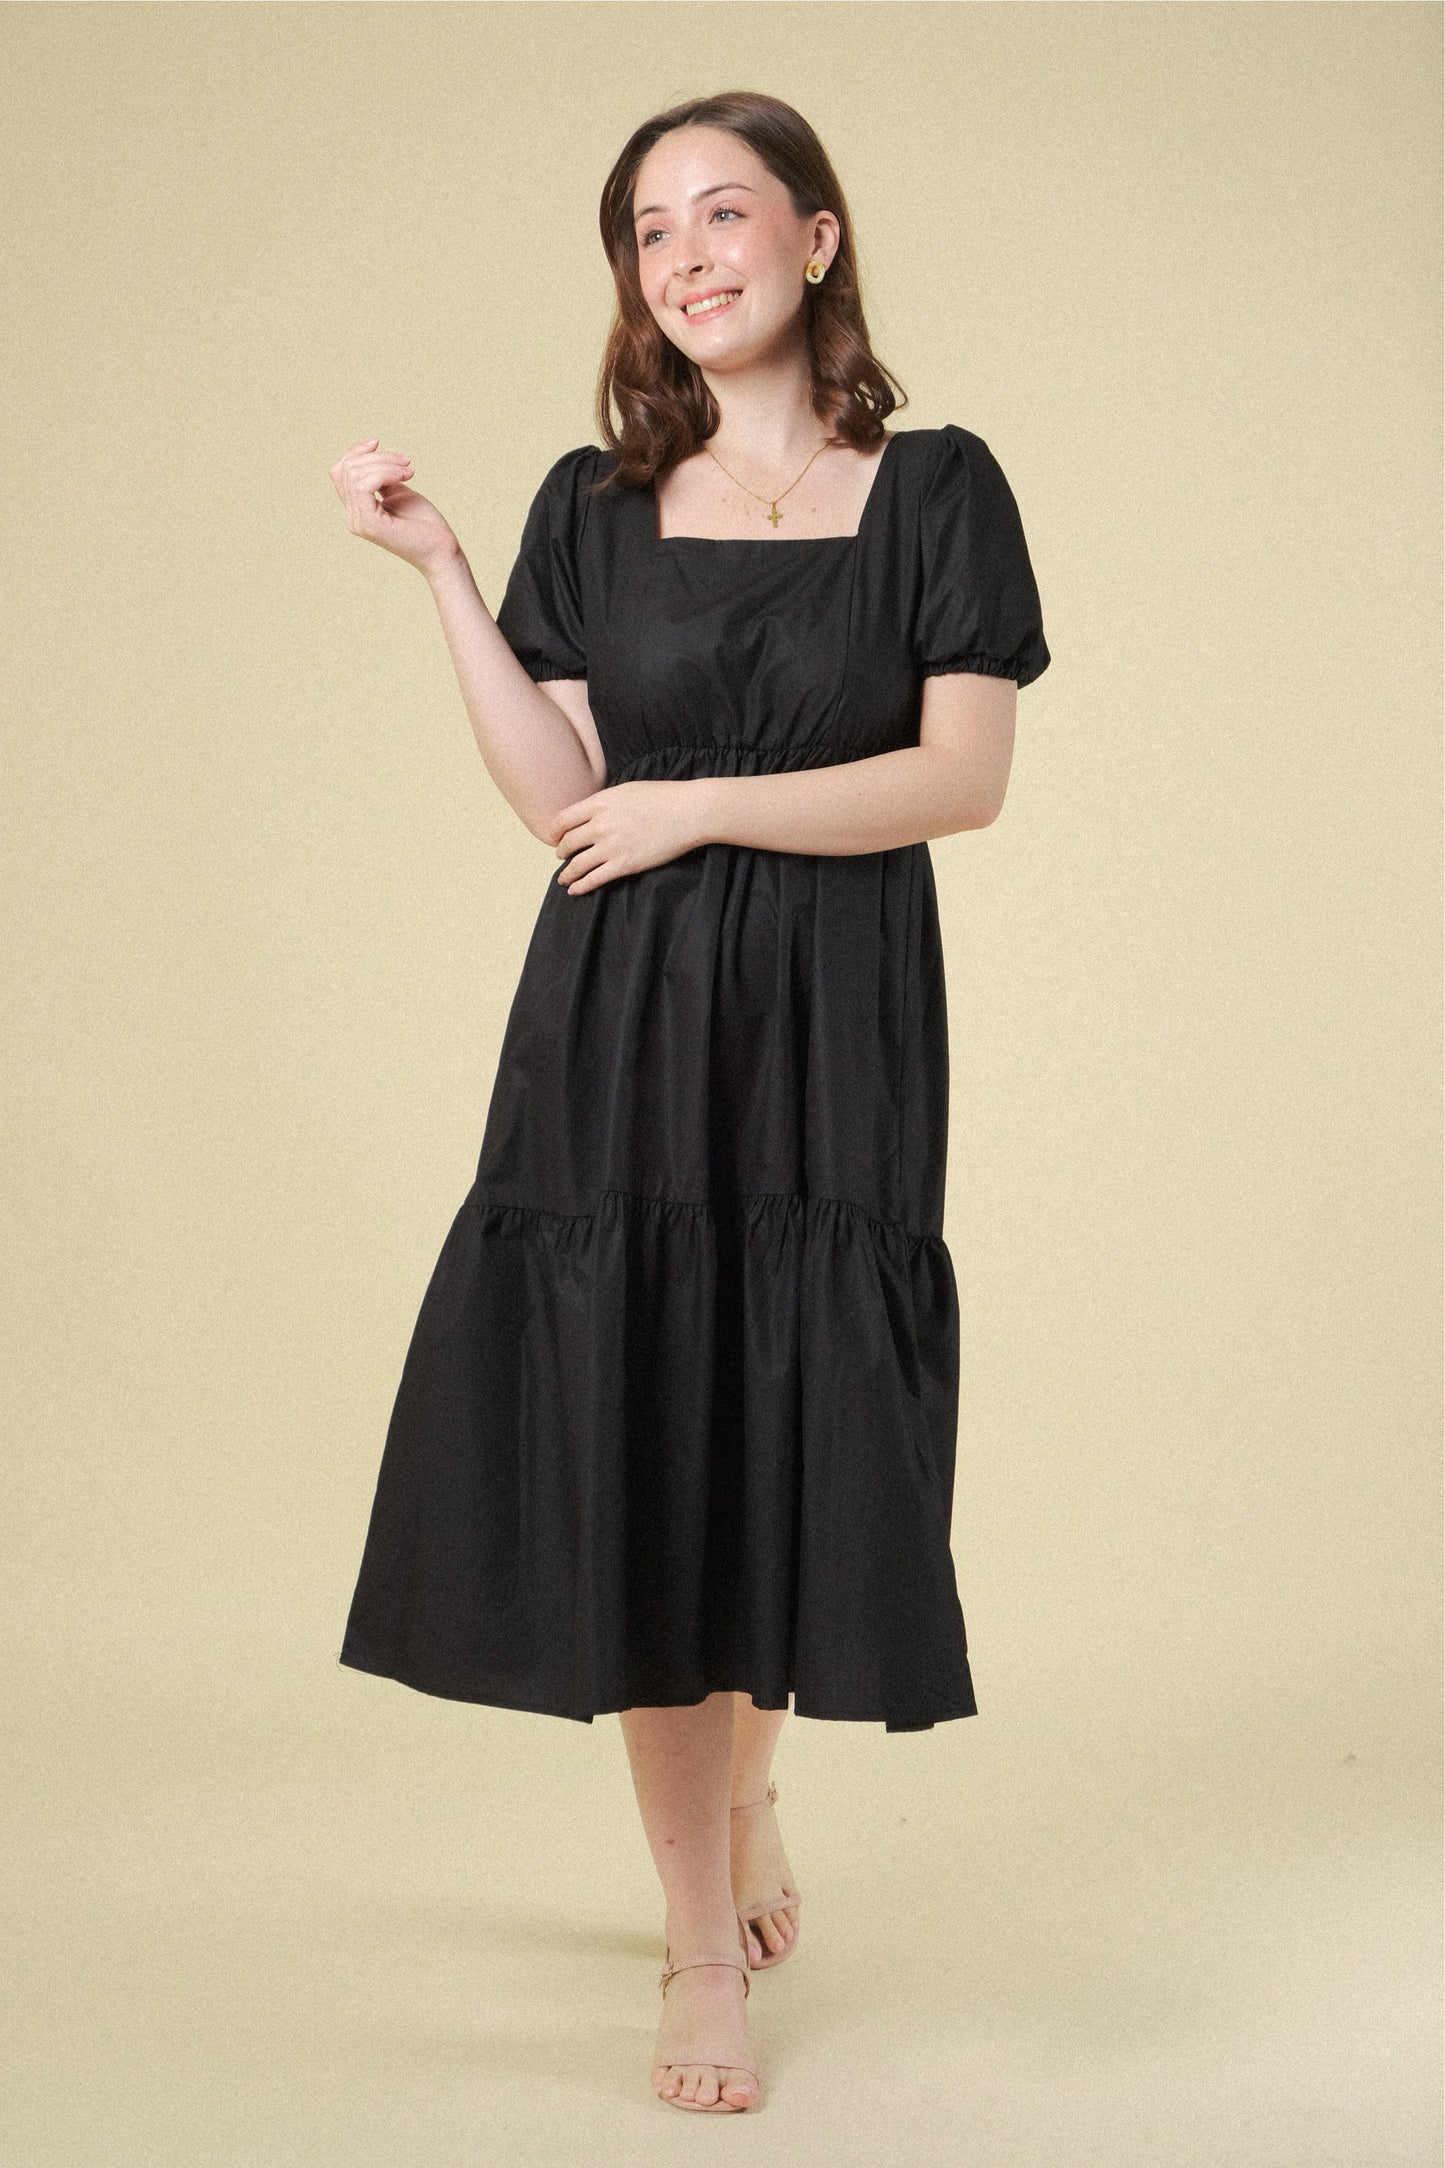 LUCILLE DRESS IN BLACK